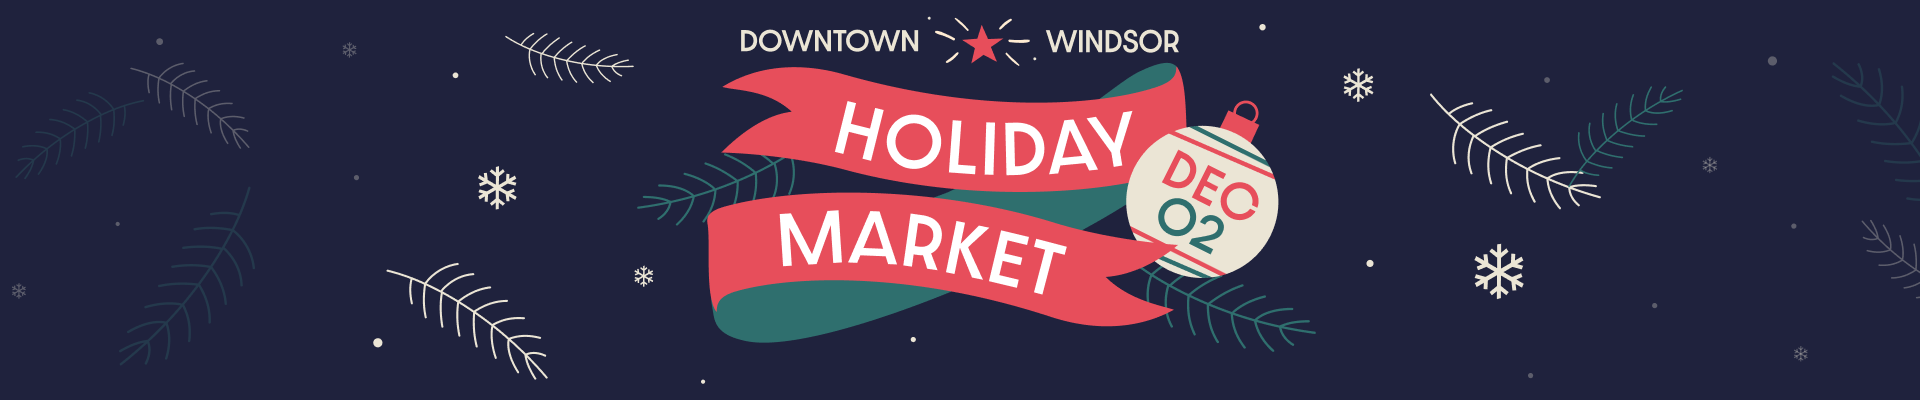 Downtown Windsor Holiday Market